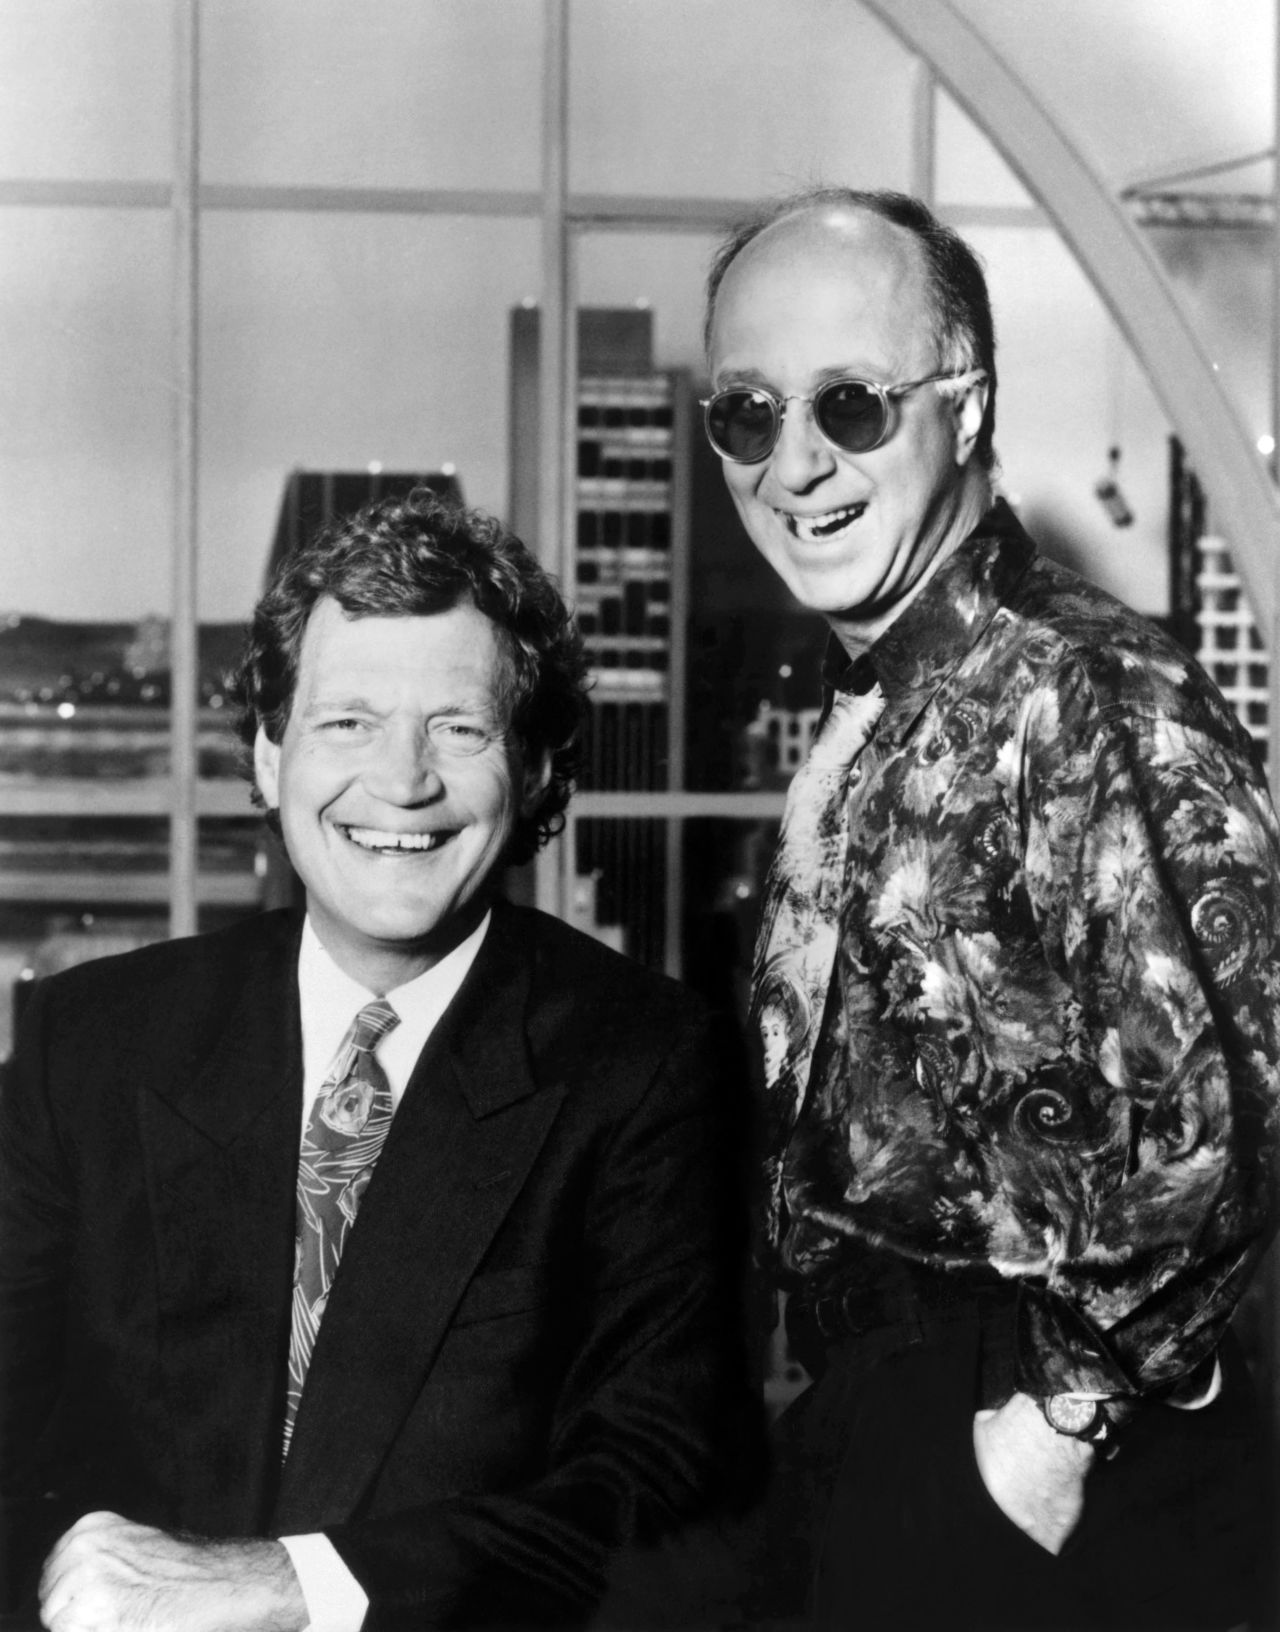 Letterman is joined by his longtime sidekick, Paul Shaffer, who was also the "Late Night" music director and band leader.